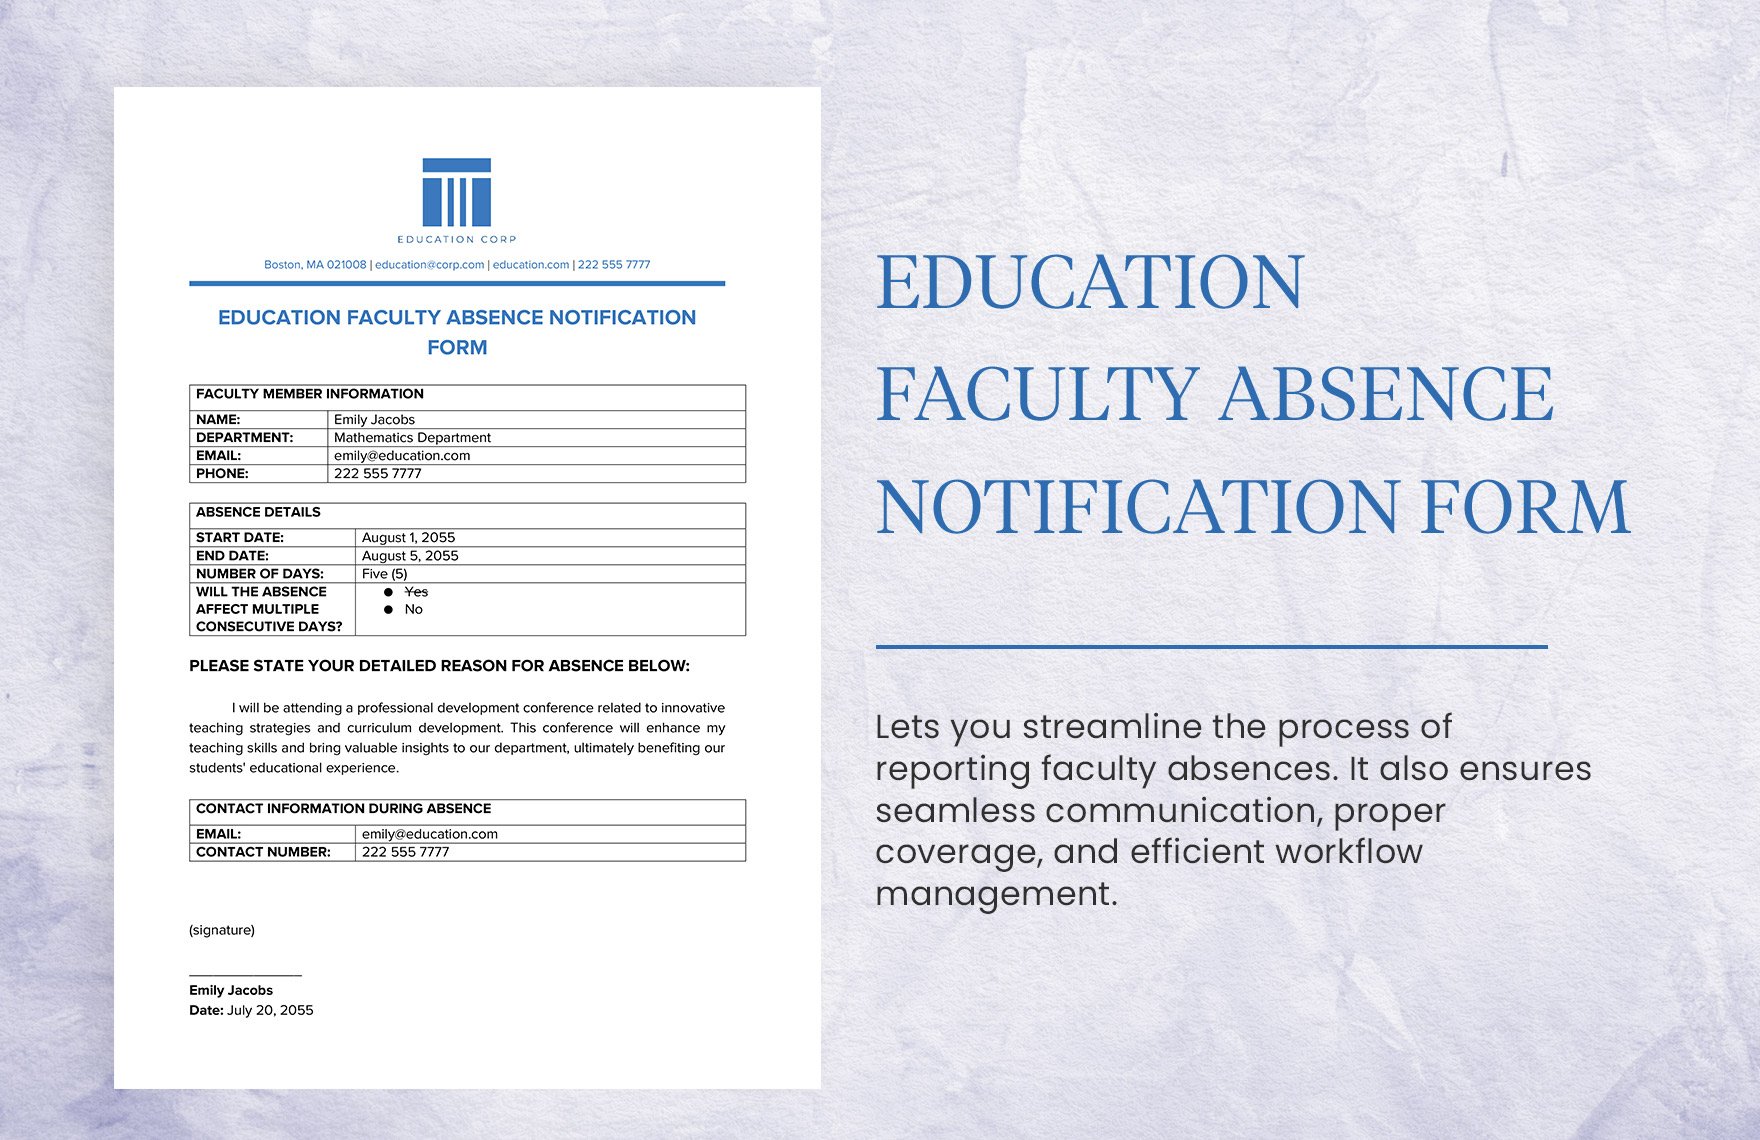 Education Faculty Absence Notification Form Template in Word, Google Docs, PDF